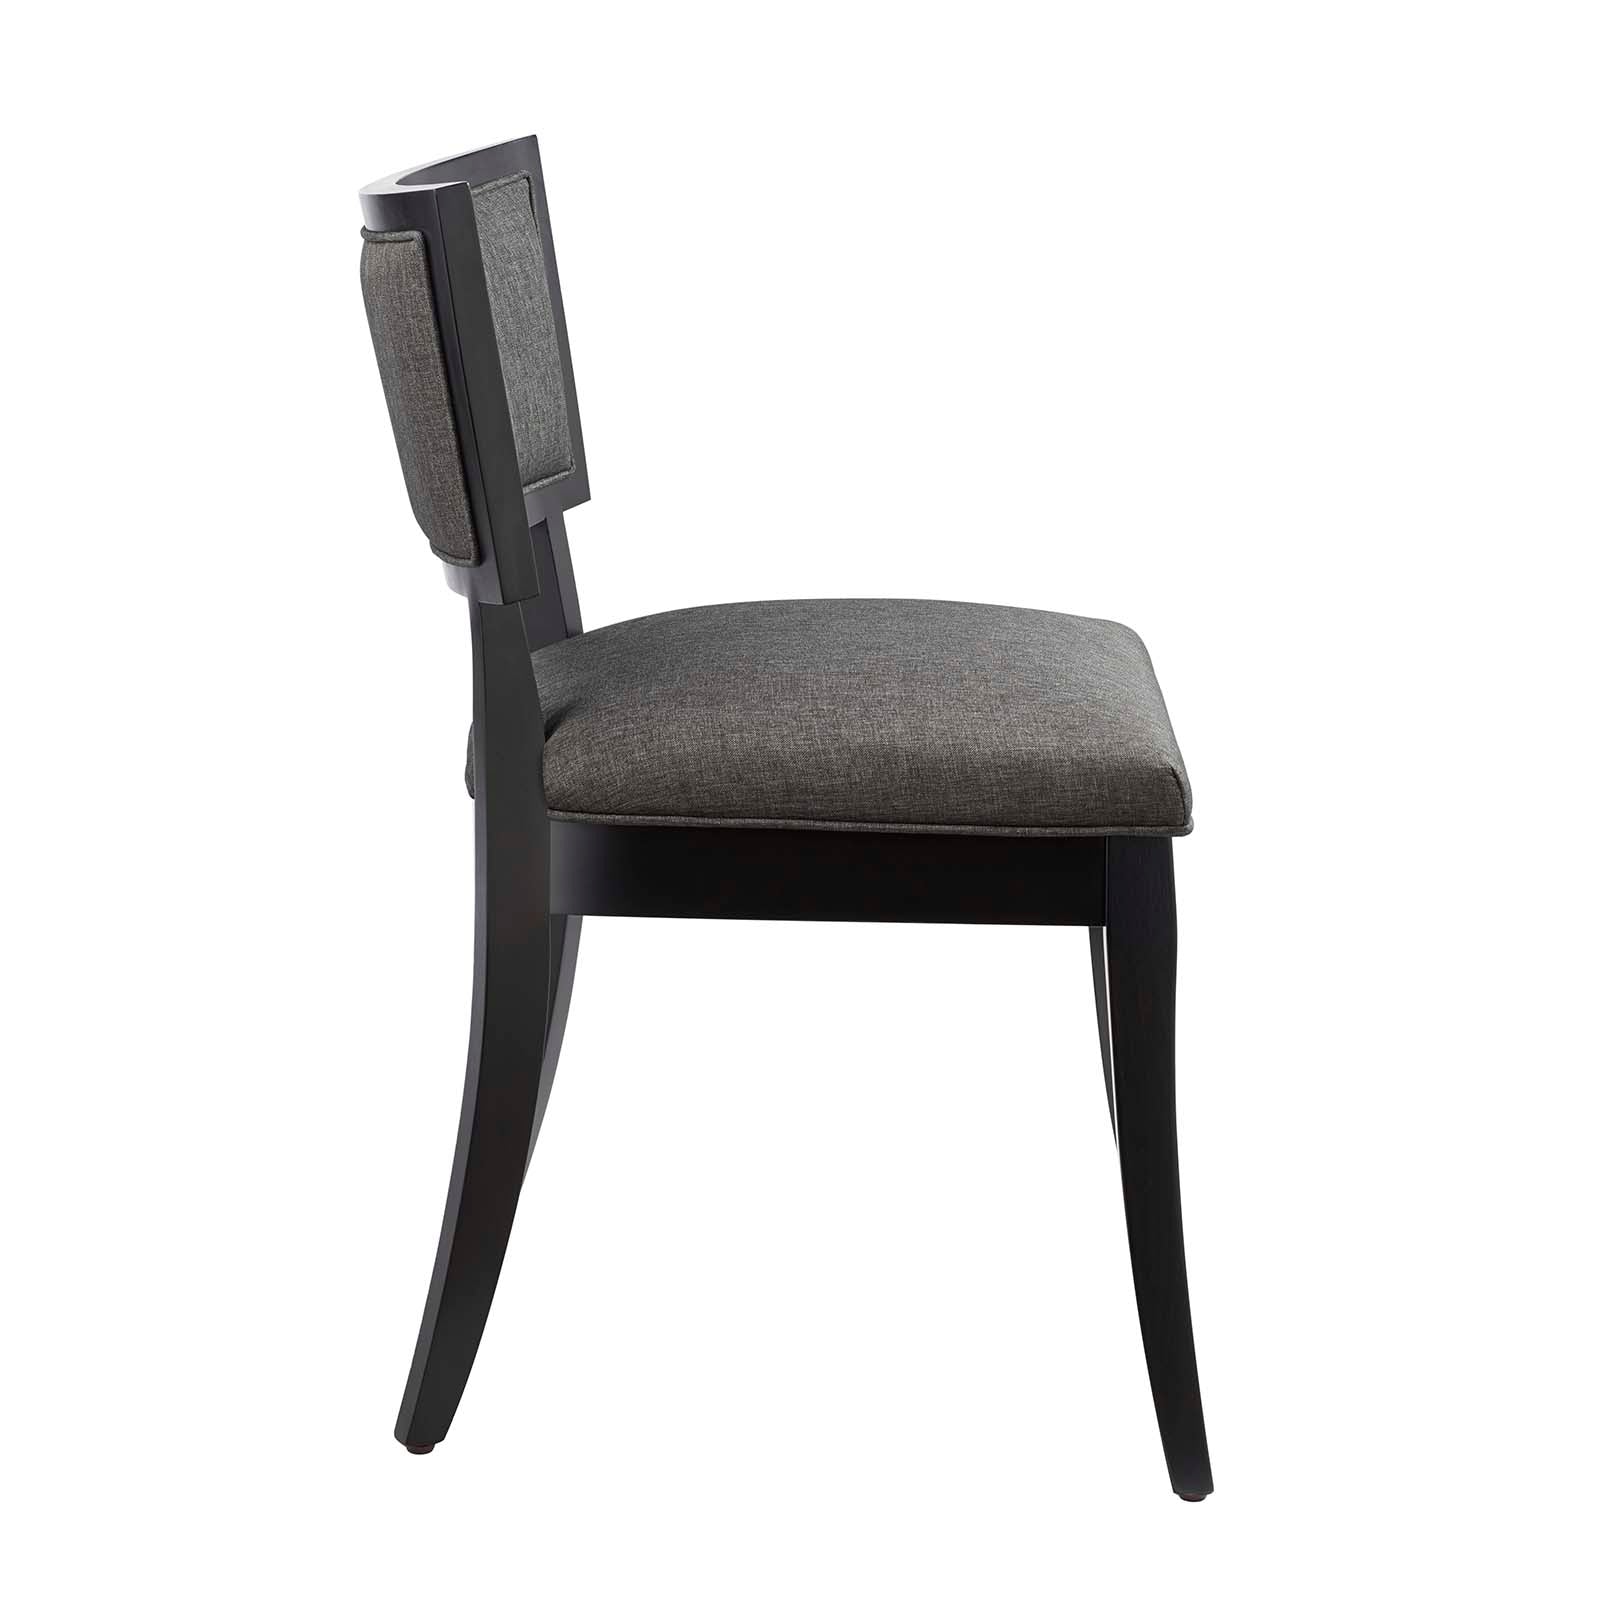 Pristine Upholstered Fabric Dining Chairs - Set of 2 - East Shore Modern Home Furnishings